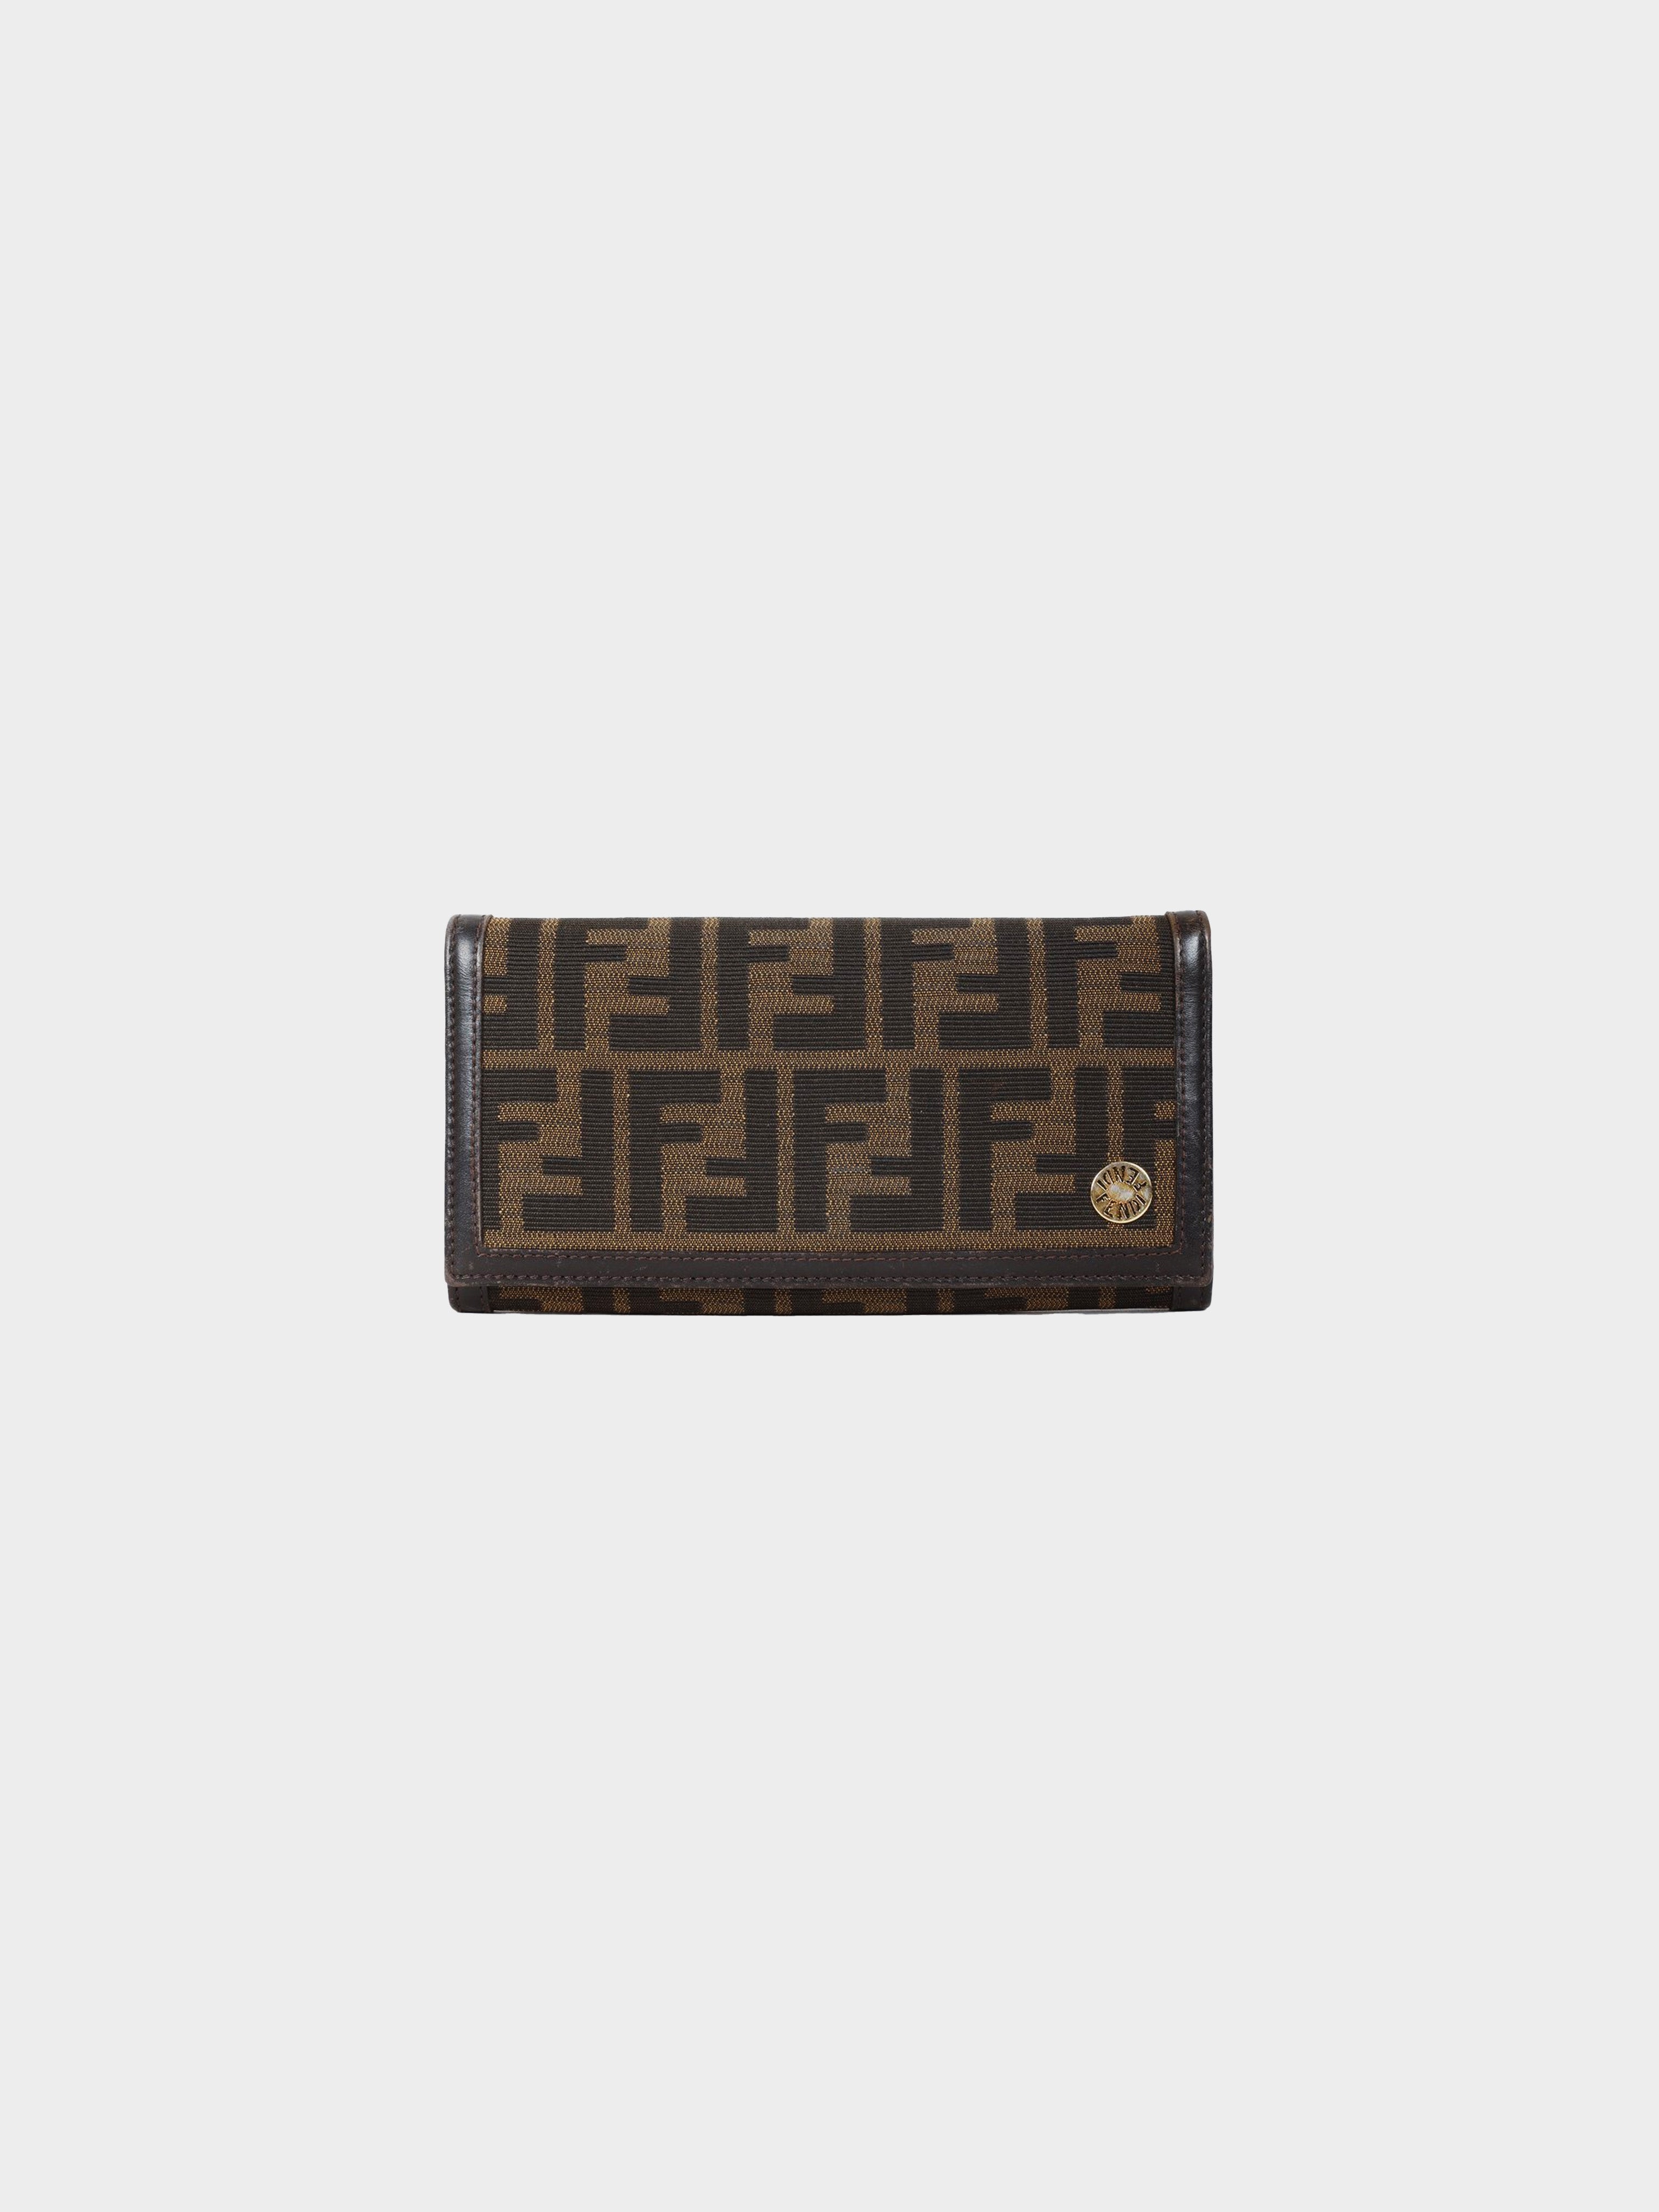 Authentic Fendi Zucca Canvas Brown Leather Wallet